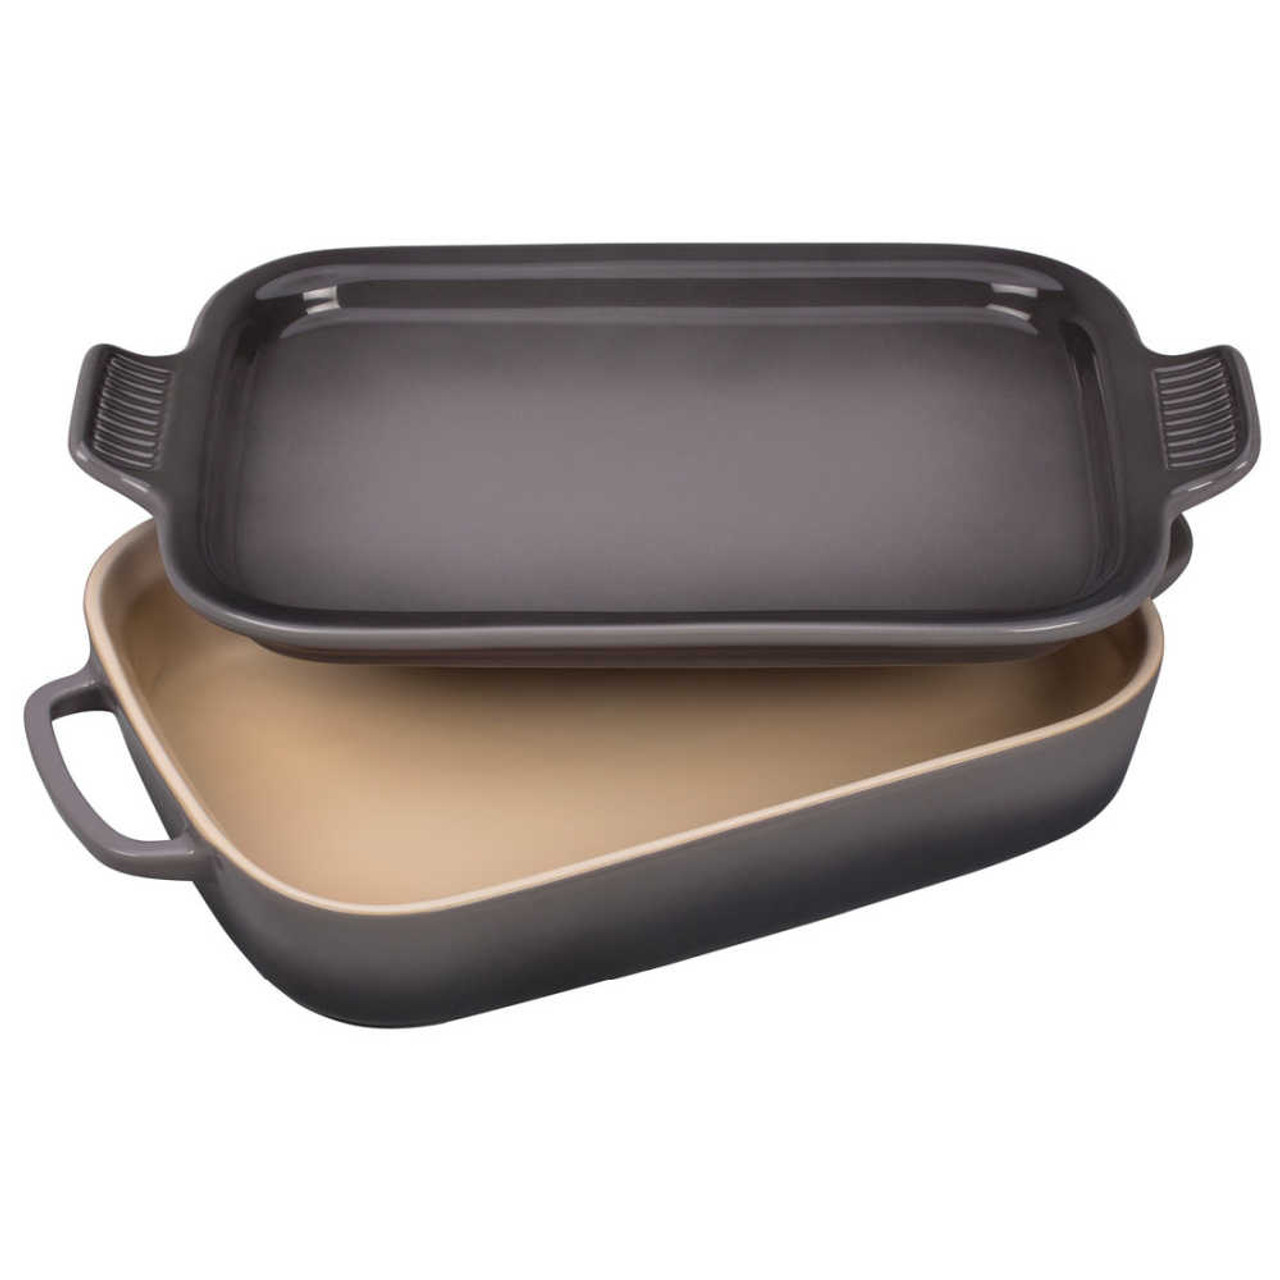 https://cdn11.bigcommerce.com/s-hccytny0od/images/stencil/1280x1280/products/3427/12325/le-creuset-rectangular-dish-platter-lid-oyster-2__72481.1596489365.jpg?c=2?imbypass=on